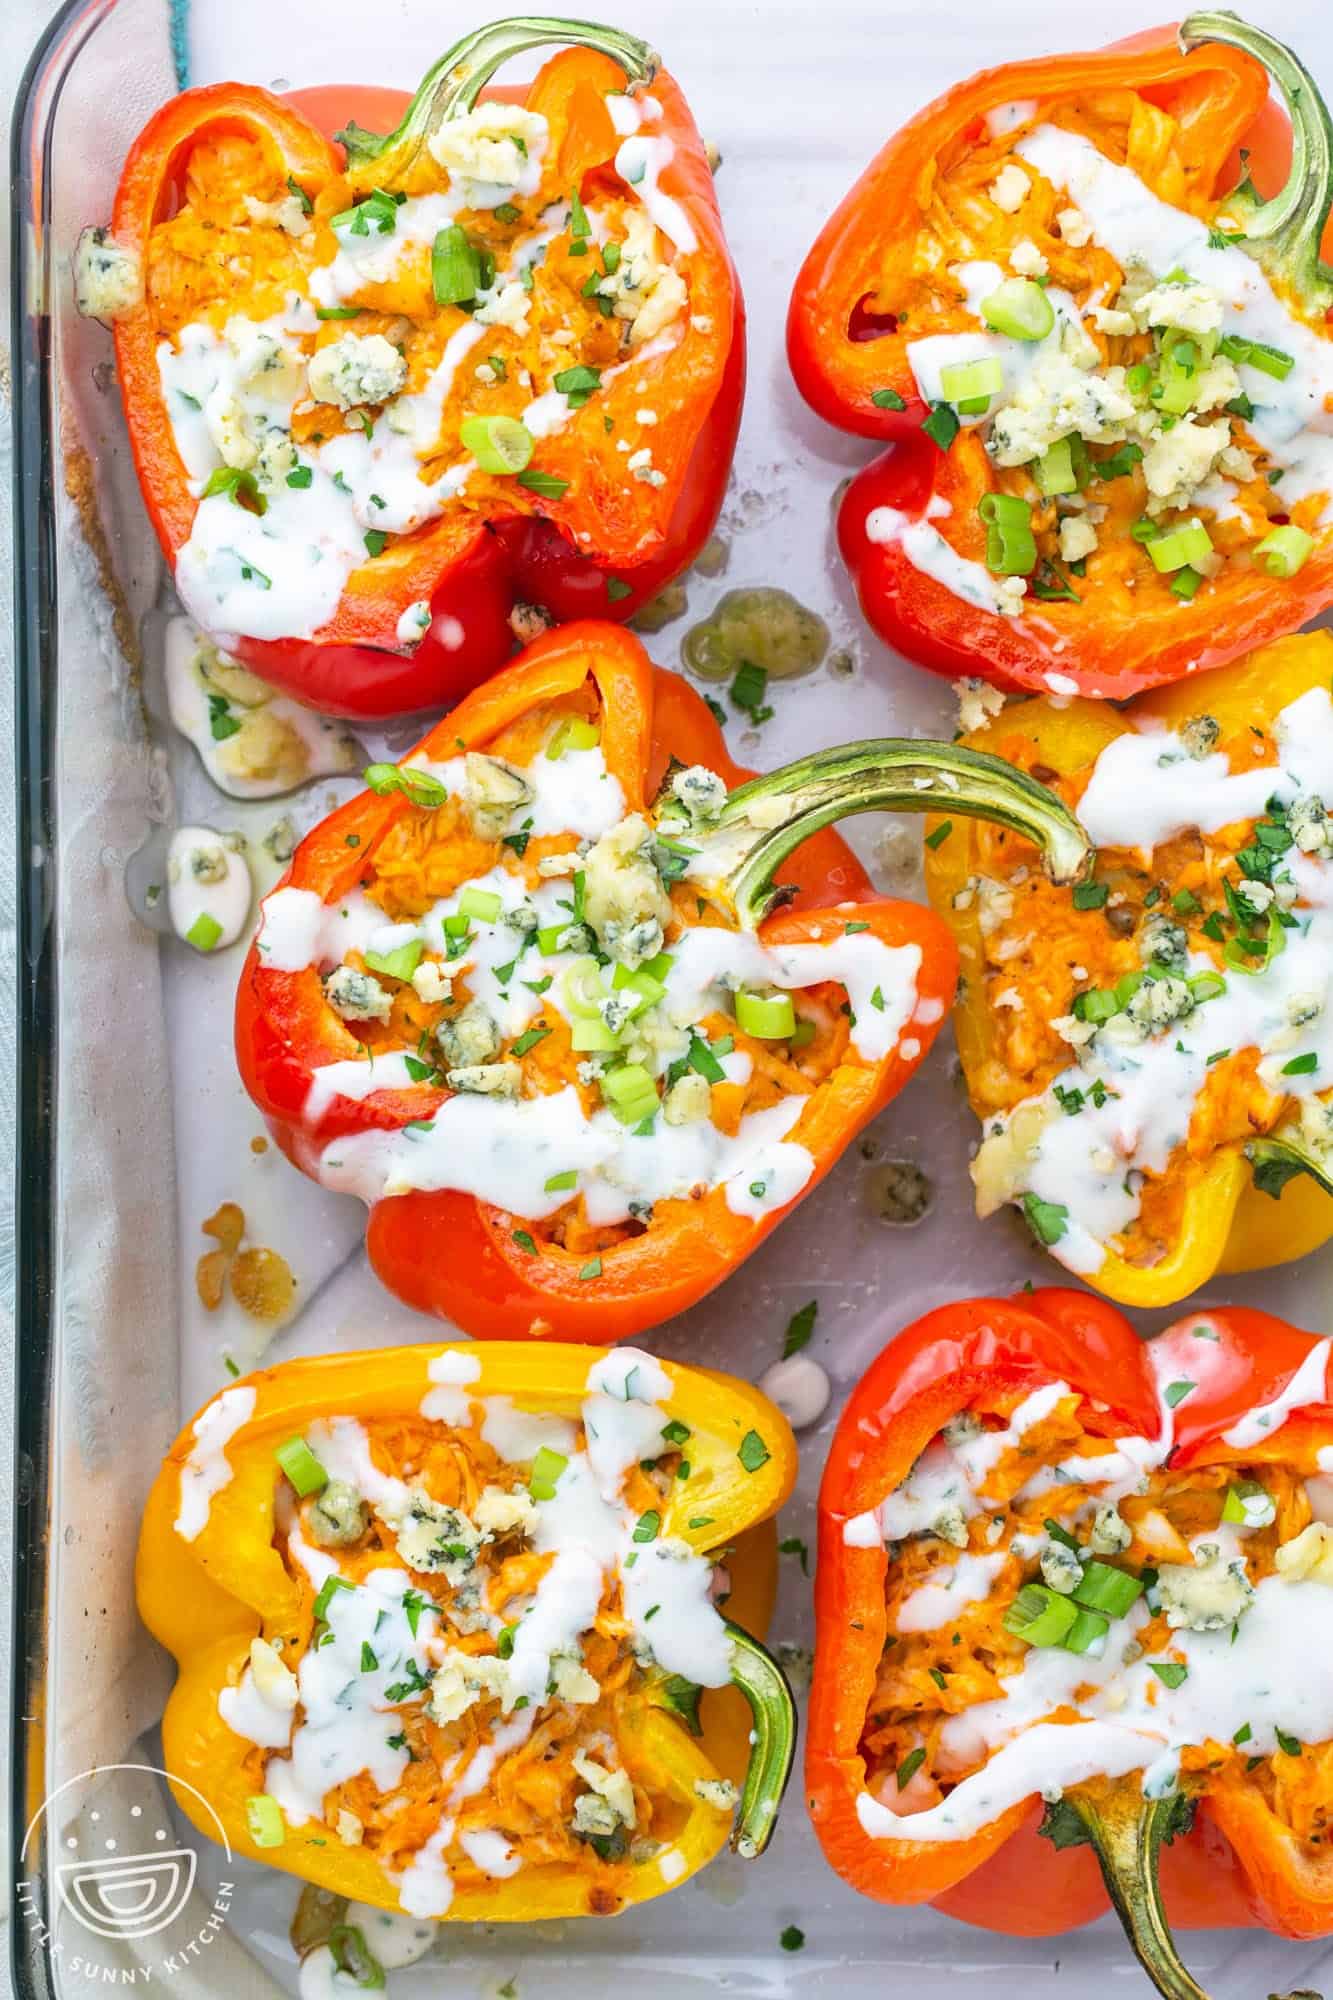 Red and yellow bell peppers, cut in half and baked, stuffed with buffalo chicken and blue cheese. There are six pepper halves in a glass baking dish.